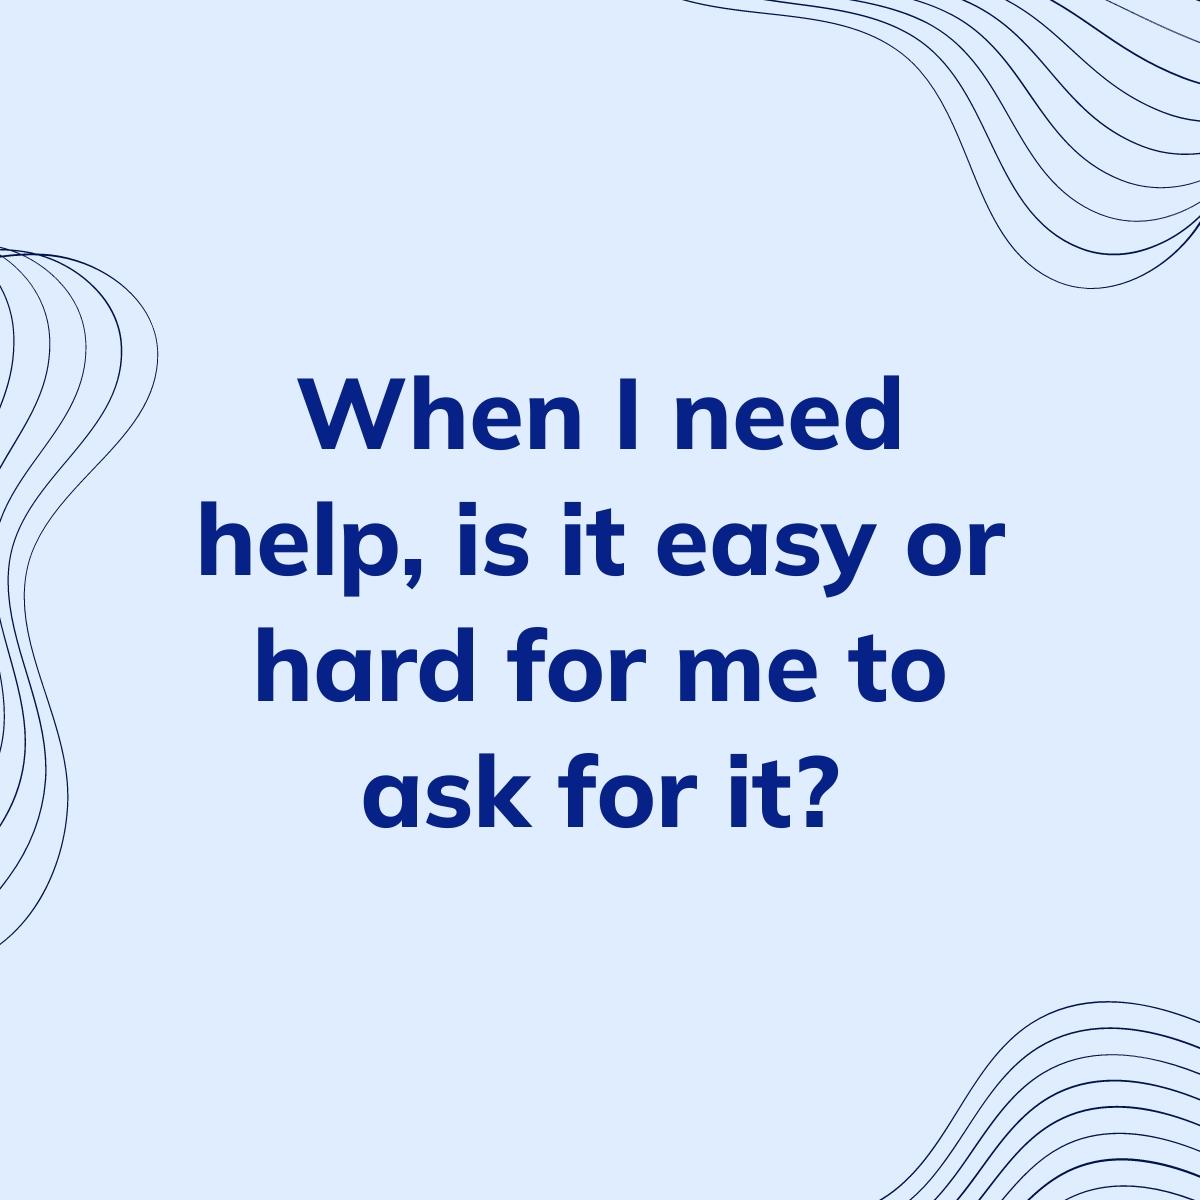 Journal Prompt: When I need help, is it easy or hard for me to ask for it?